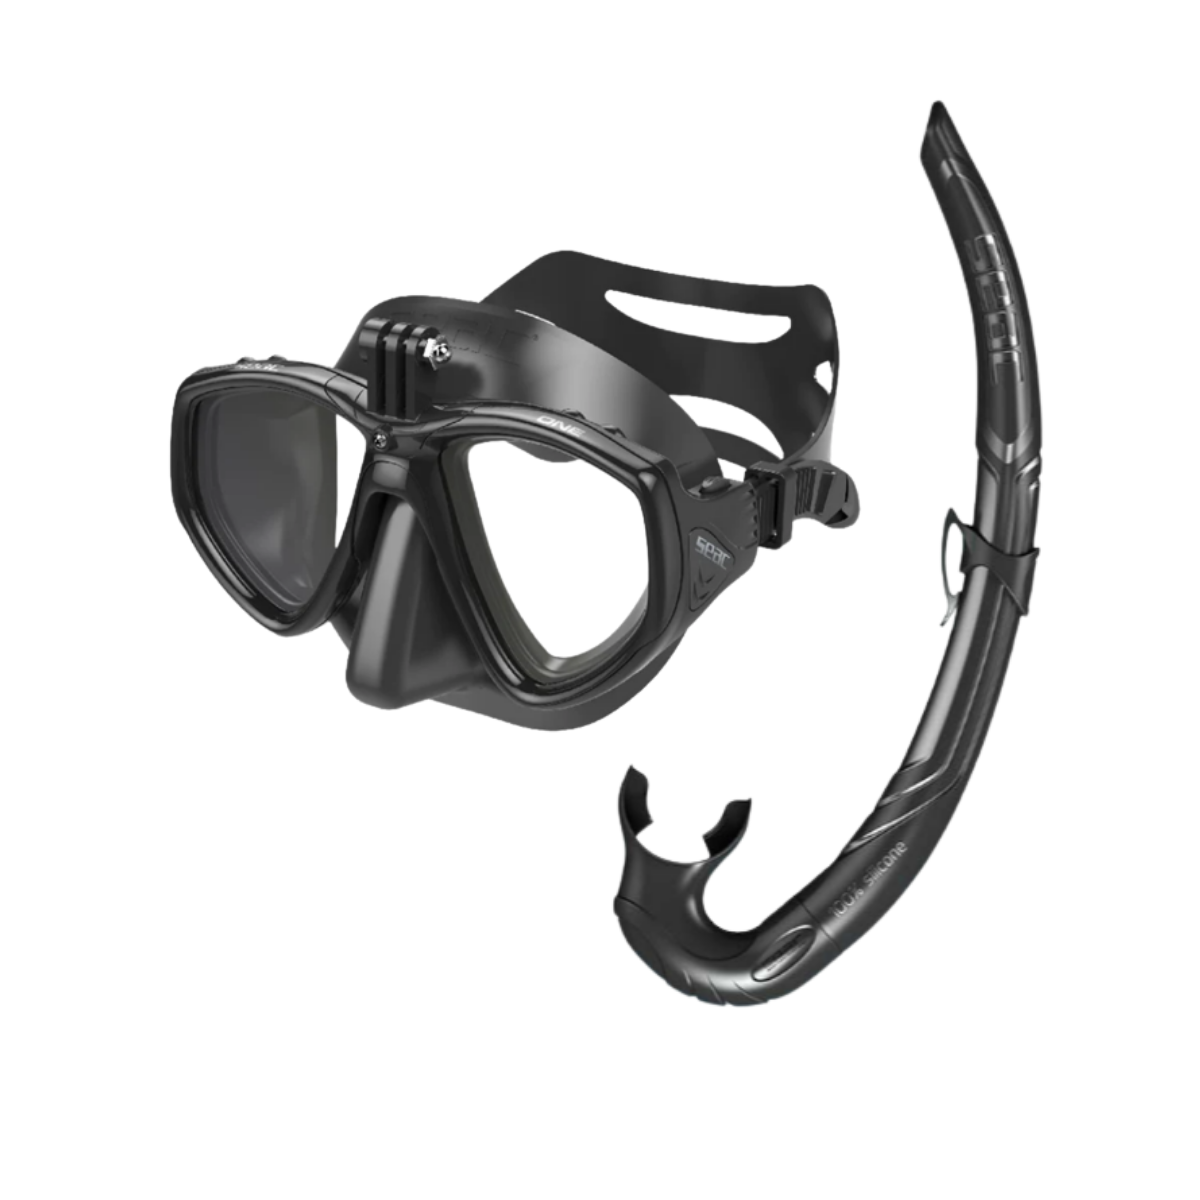 Action One Mask with GoPro Mount & Liquid Seac Snorkel Set